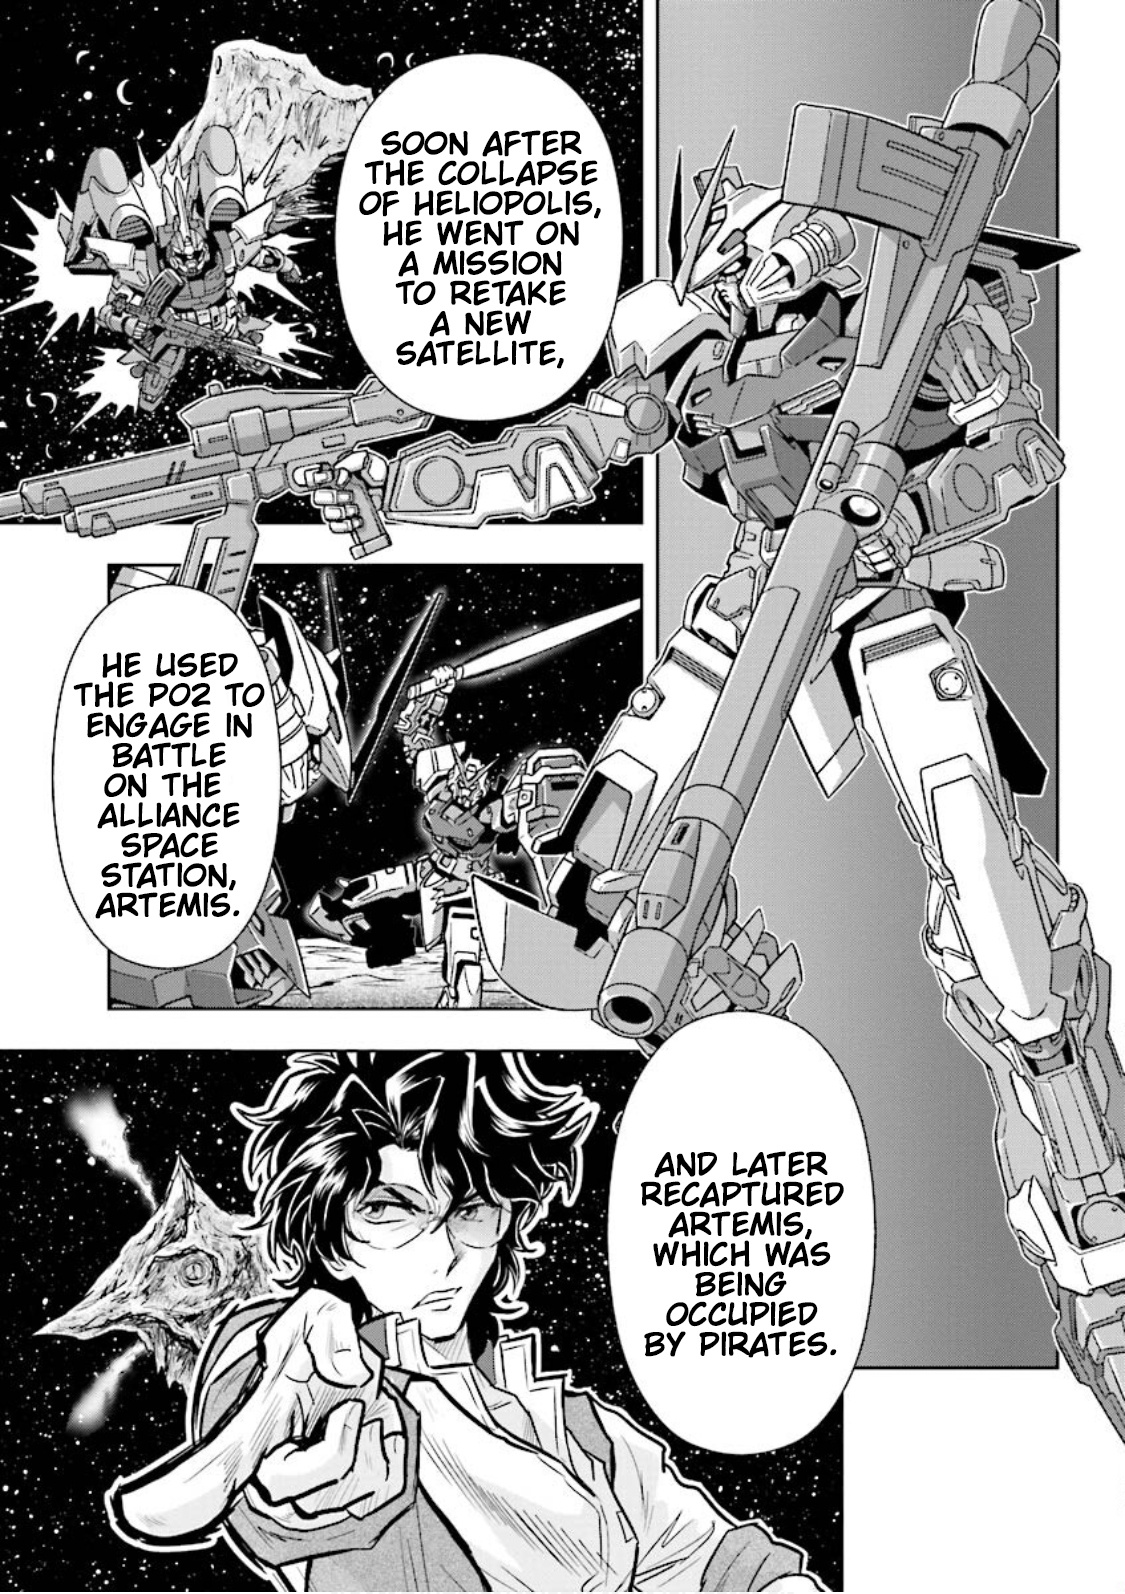 Mobile Suit Gundam Seed Astray Re:master Edition Chapter 5.5 #4